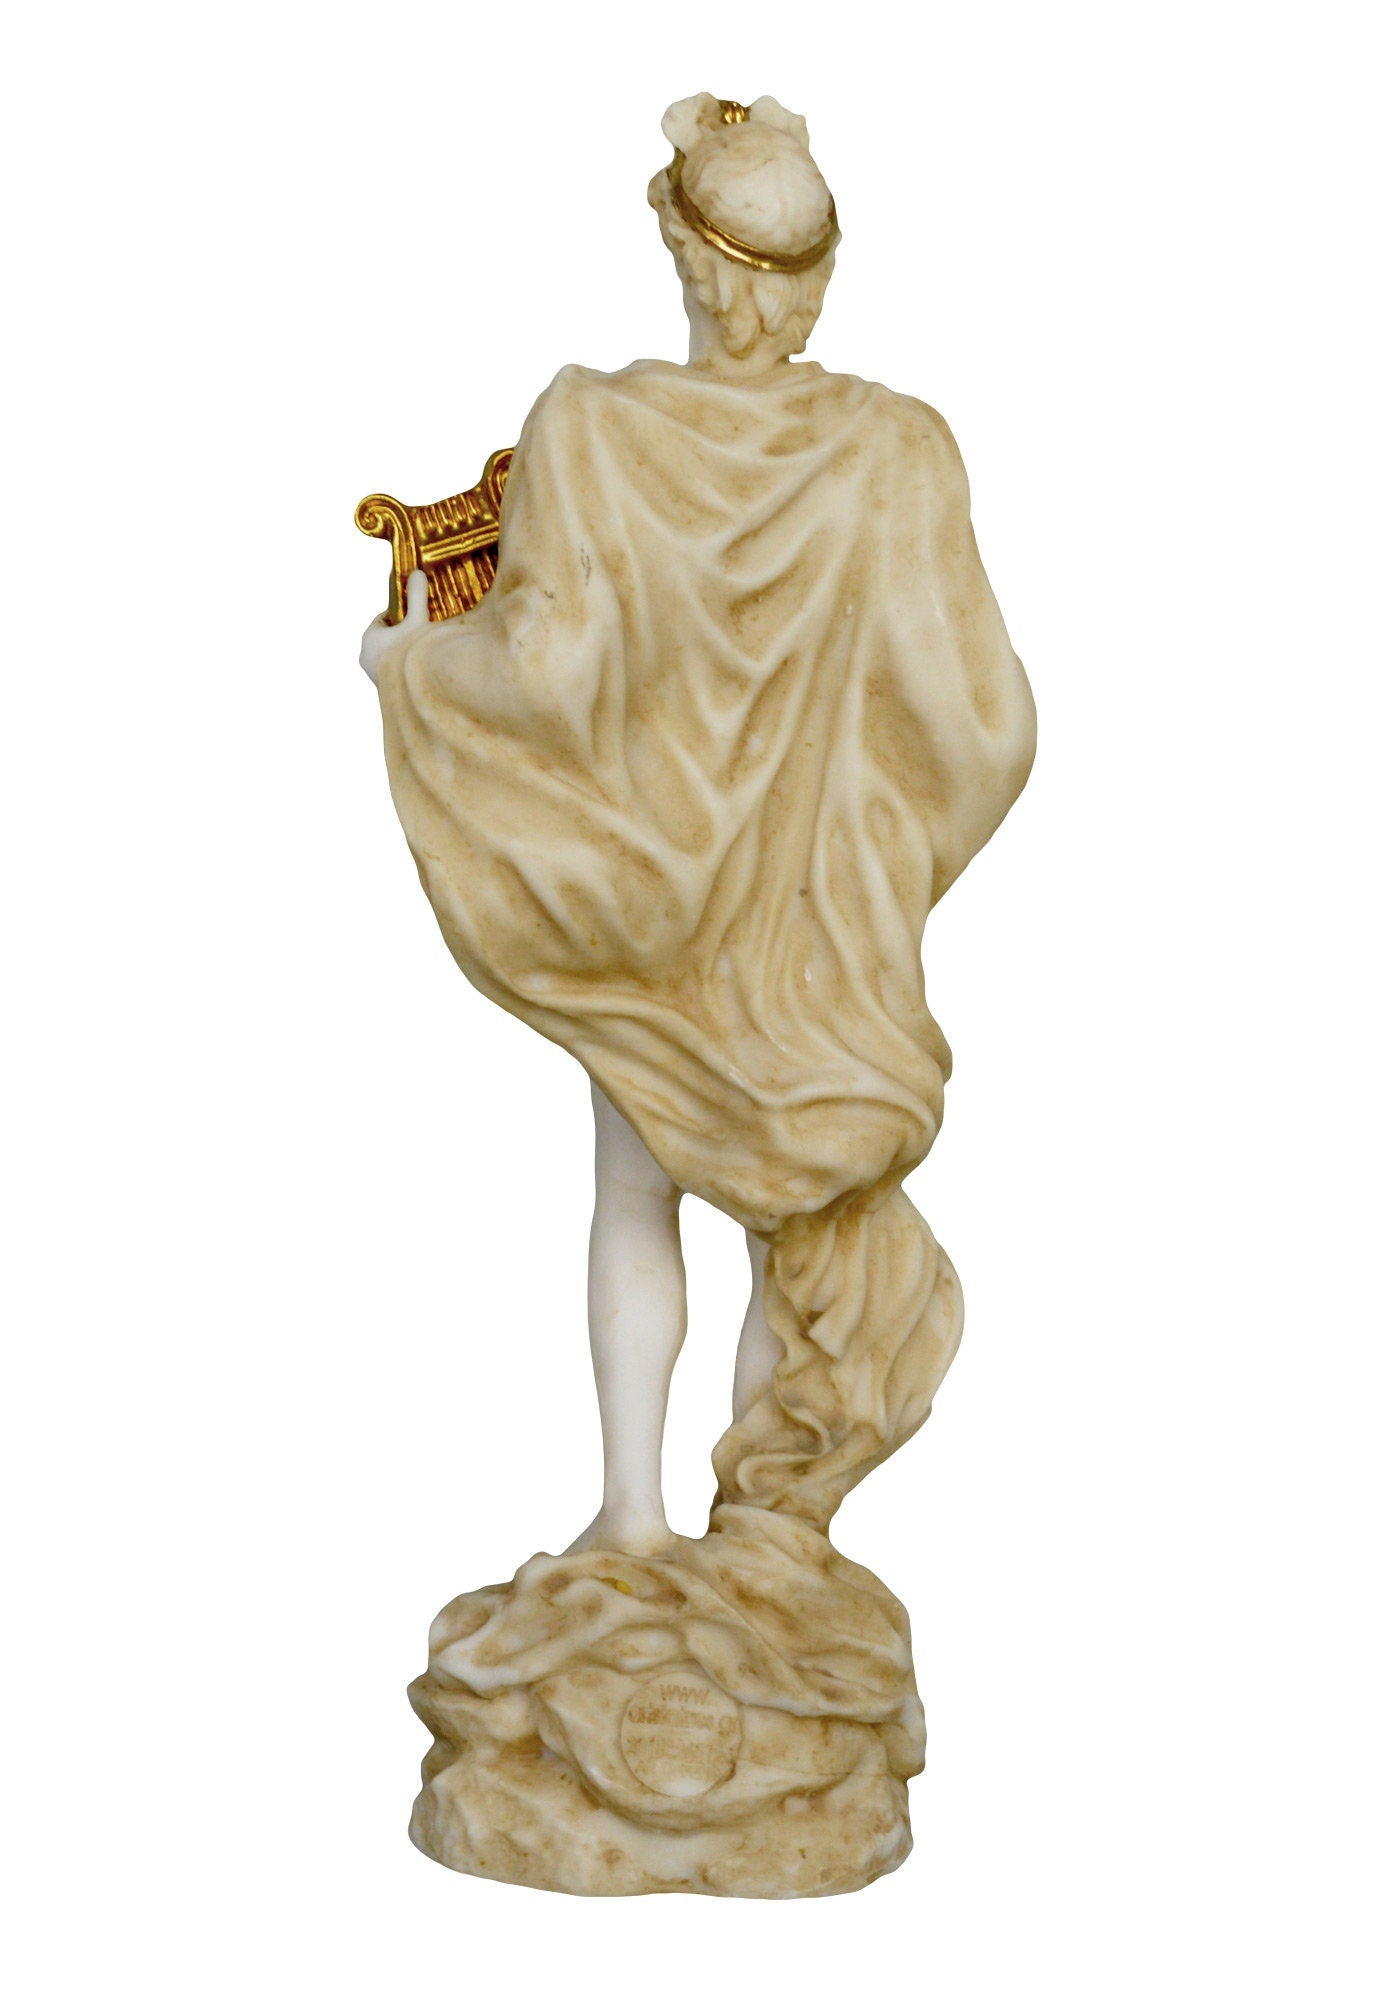 Apollo  - Greek Roman God of Arts, Music, Poetry, Sun and Light, Prophecy - Aged Alabaster Statue